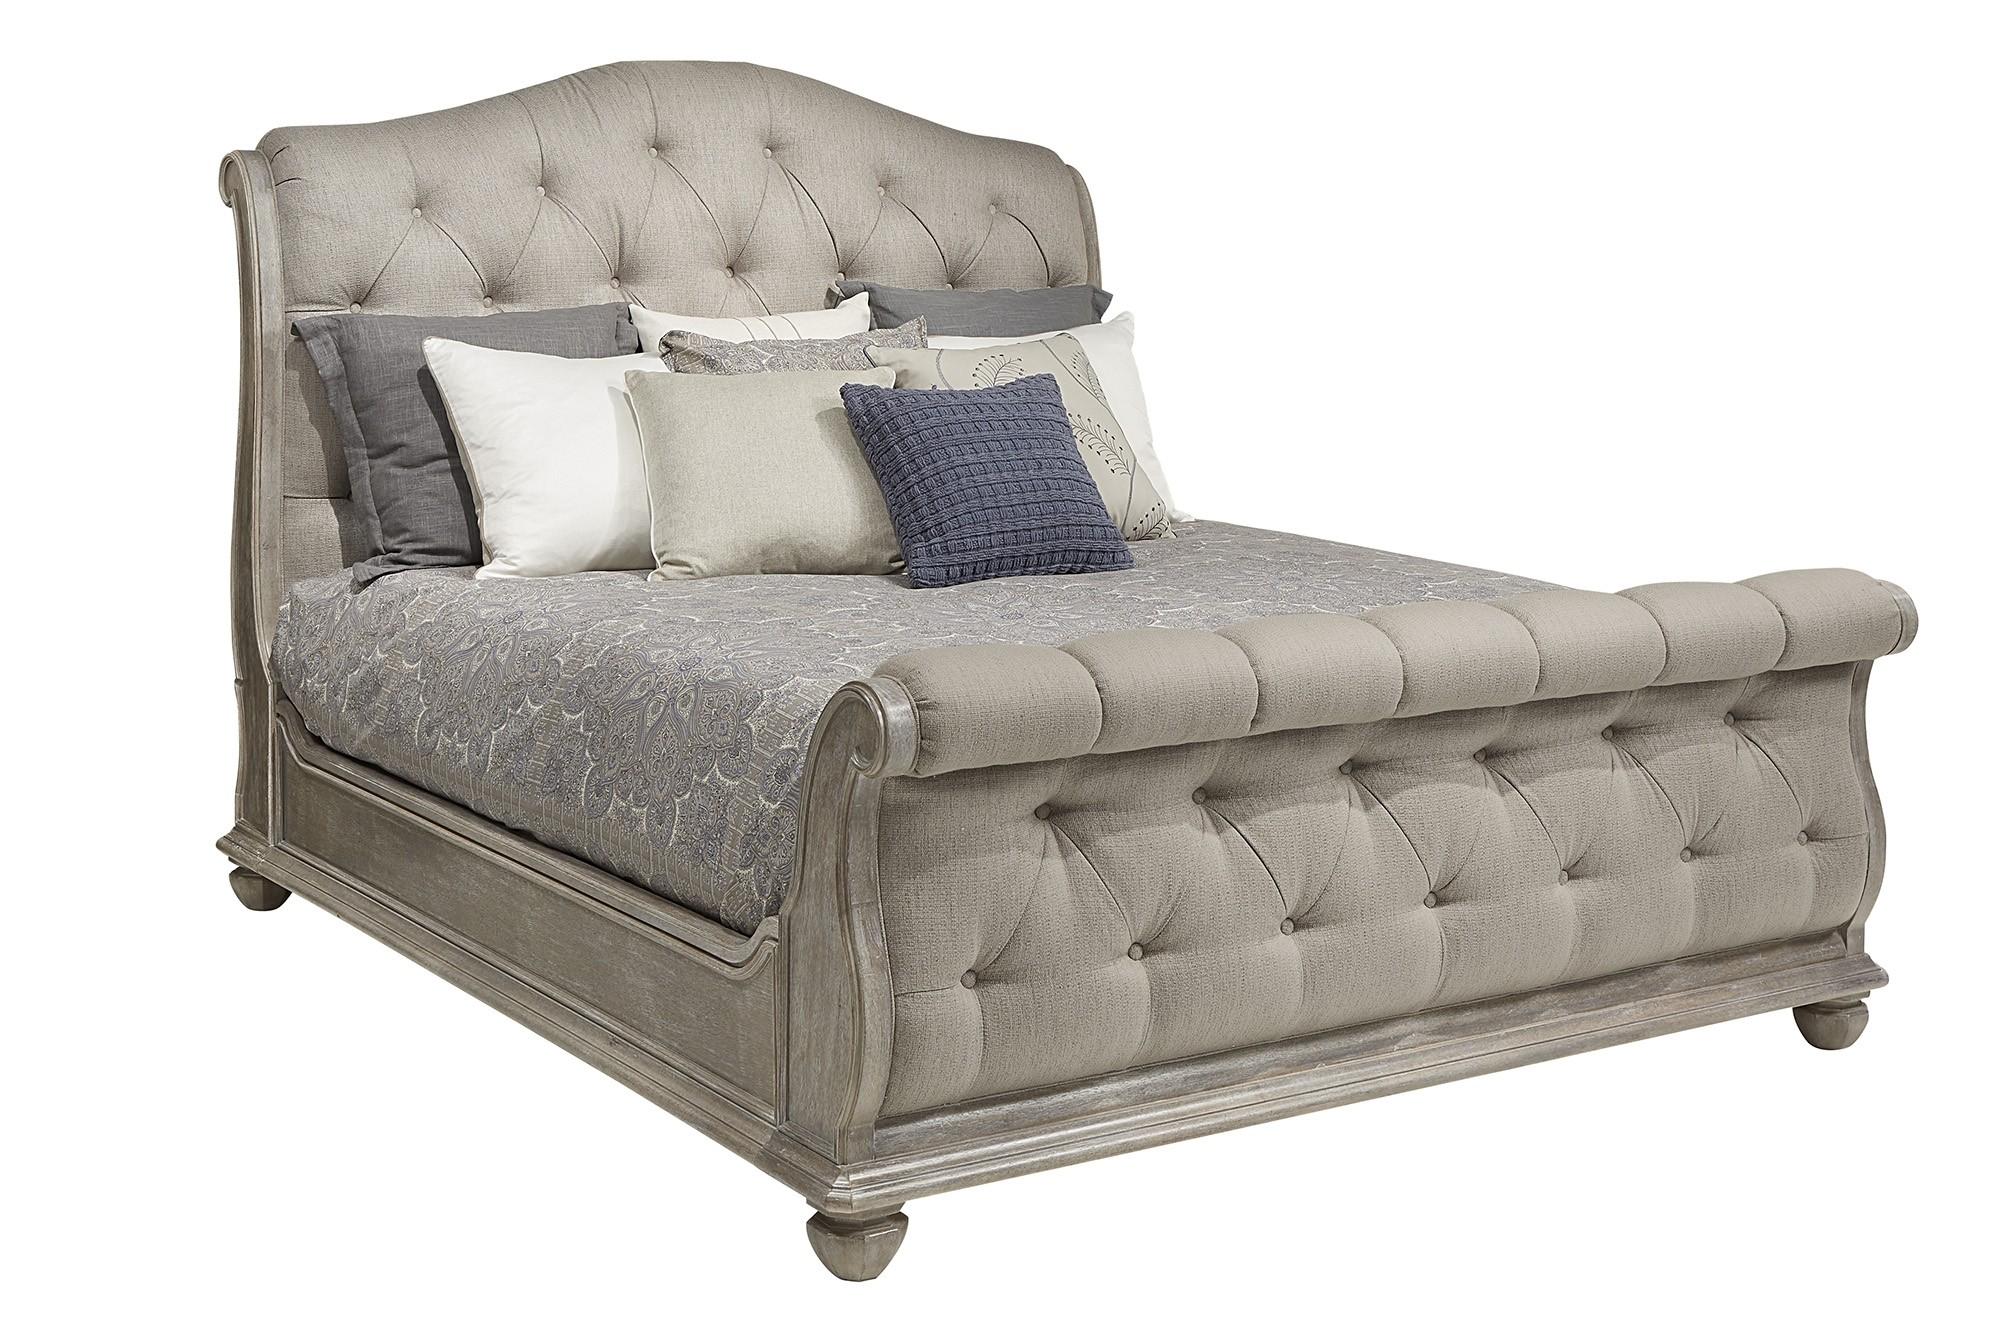 

    
Traditional Oak Finish Tufted Upholstered Queen Sleigh Bed  HD-80005
